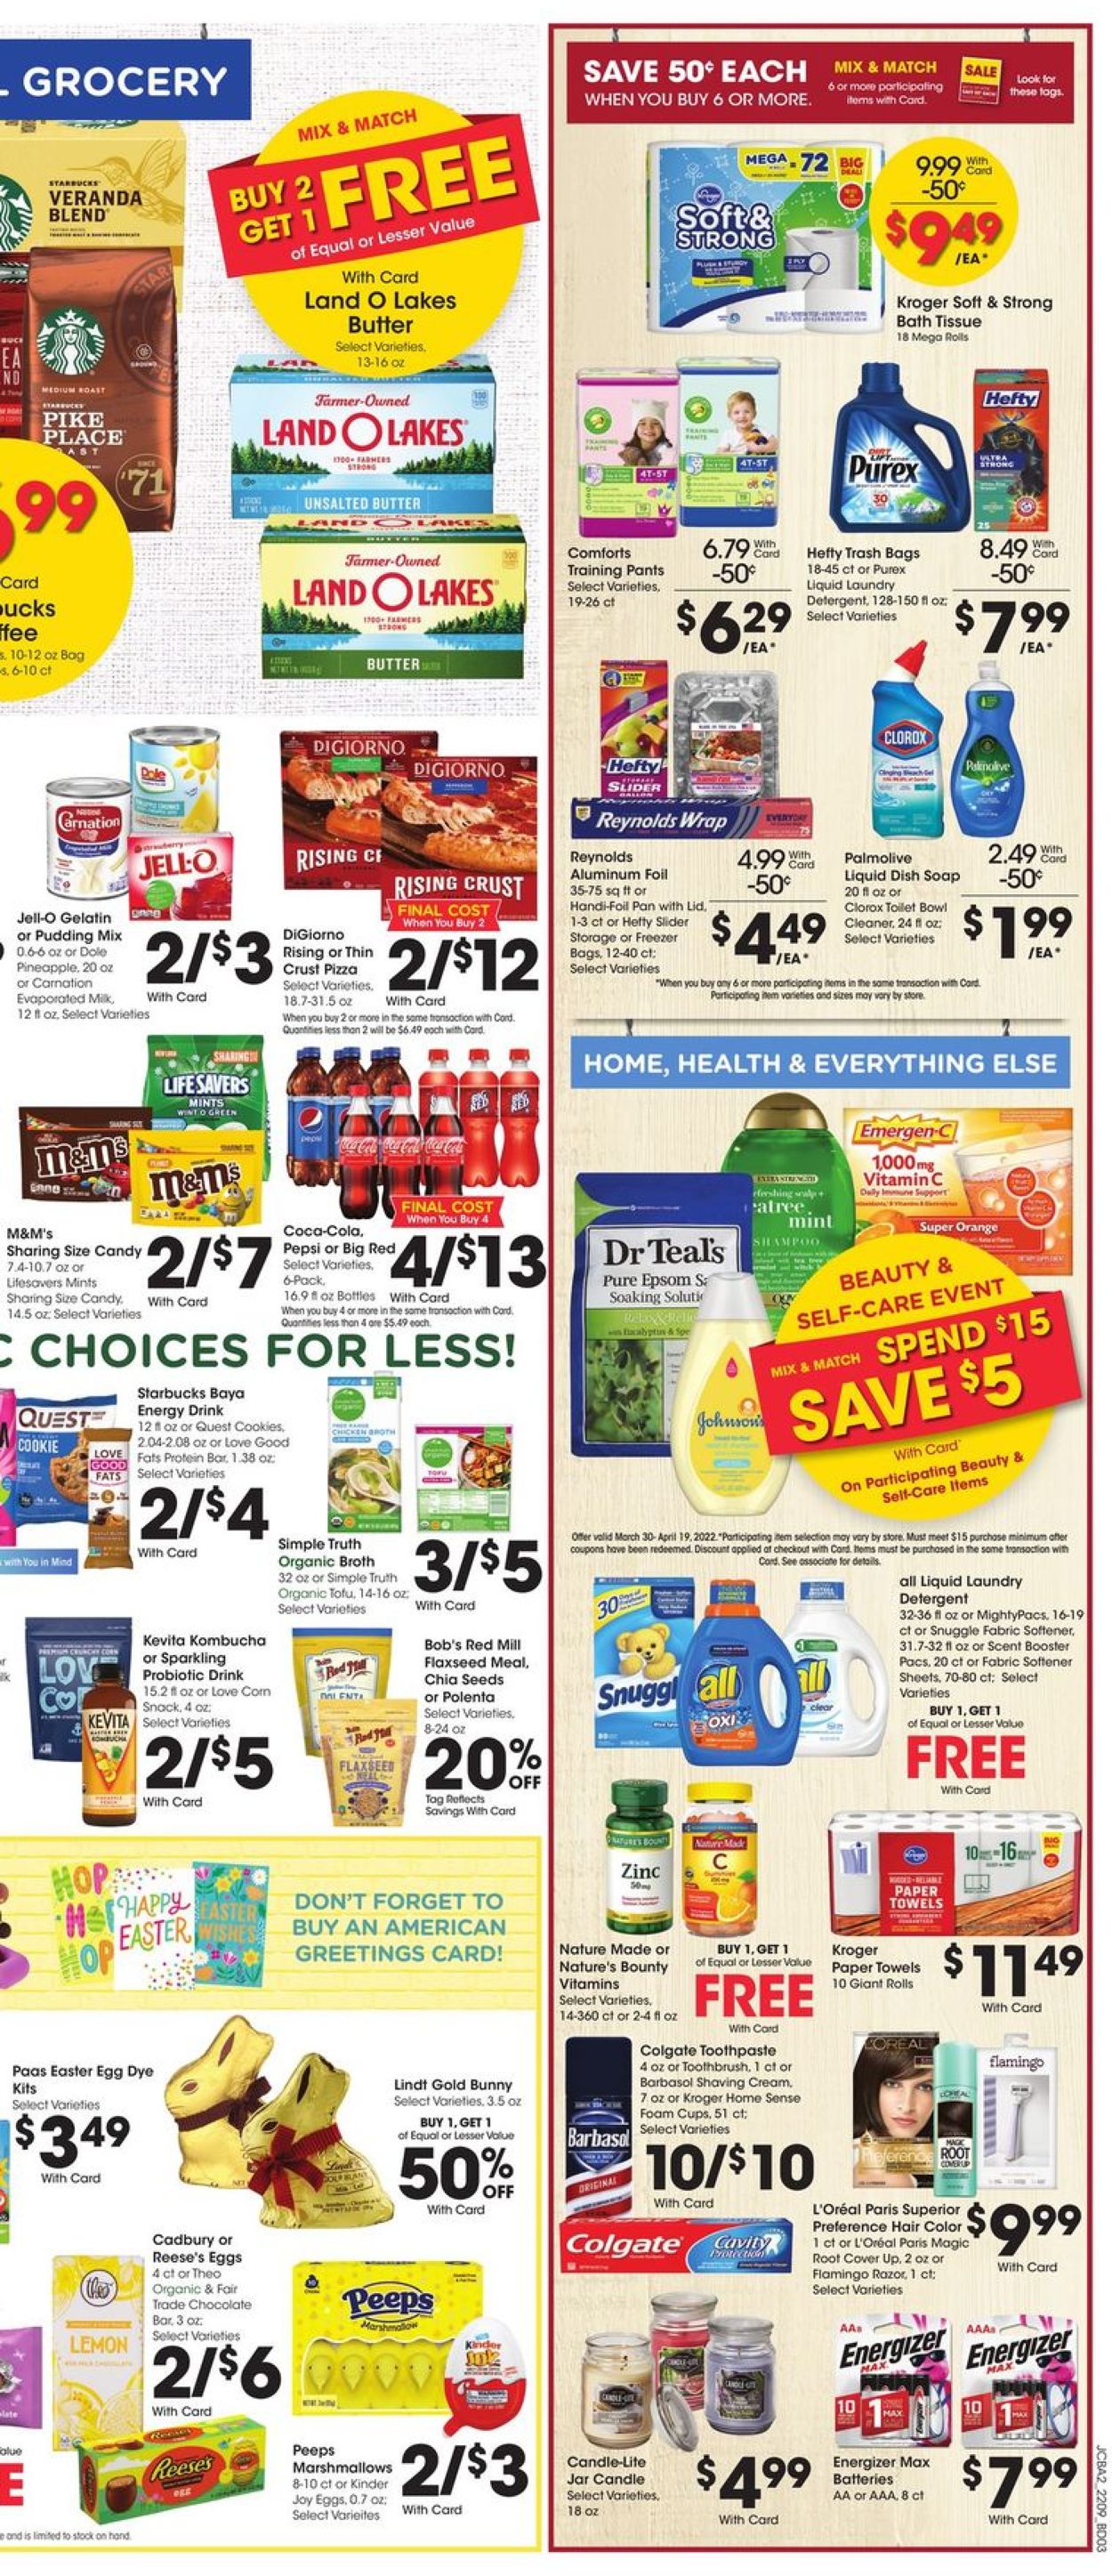 Catalogue Jay C Food Stores from 03/30/2022